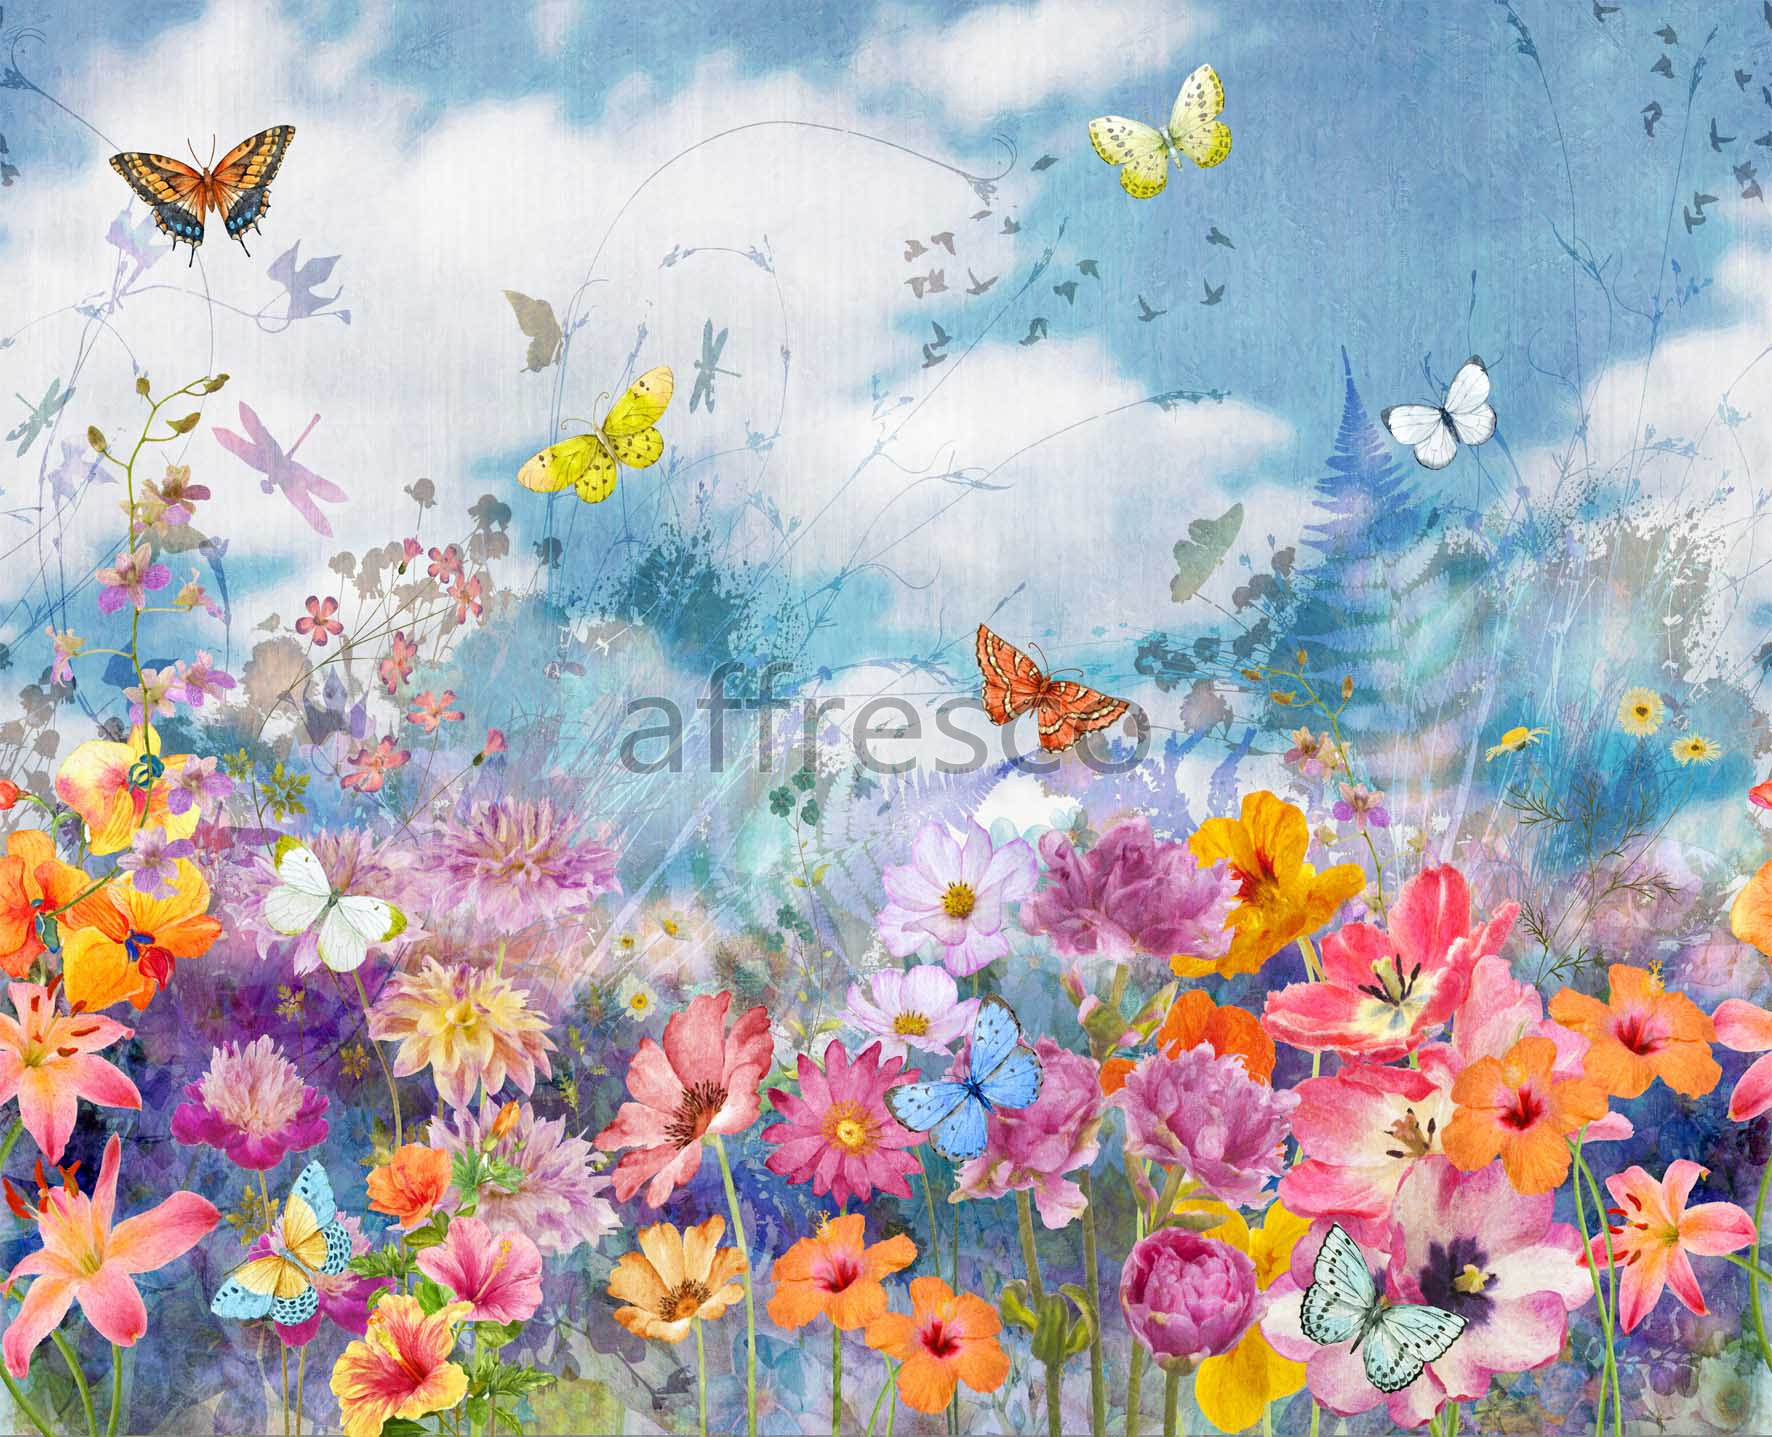 ID135938 | Flowers | Multicolored flowers and butterflies | Affresco Factory